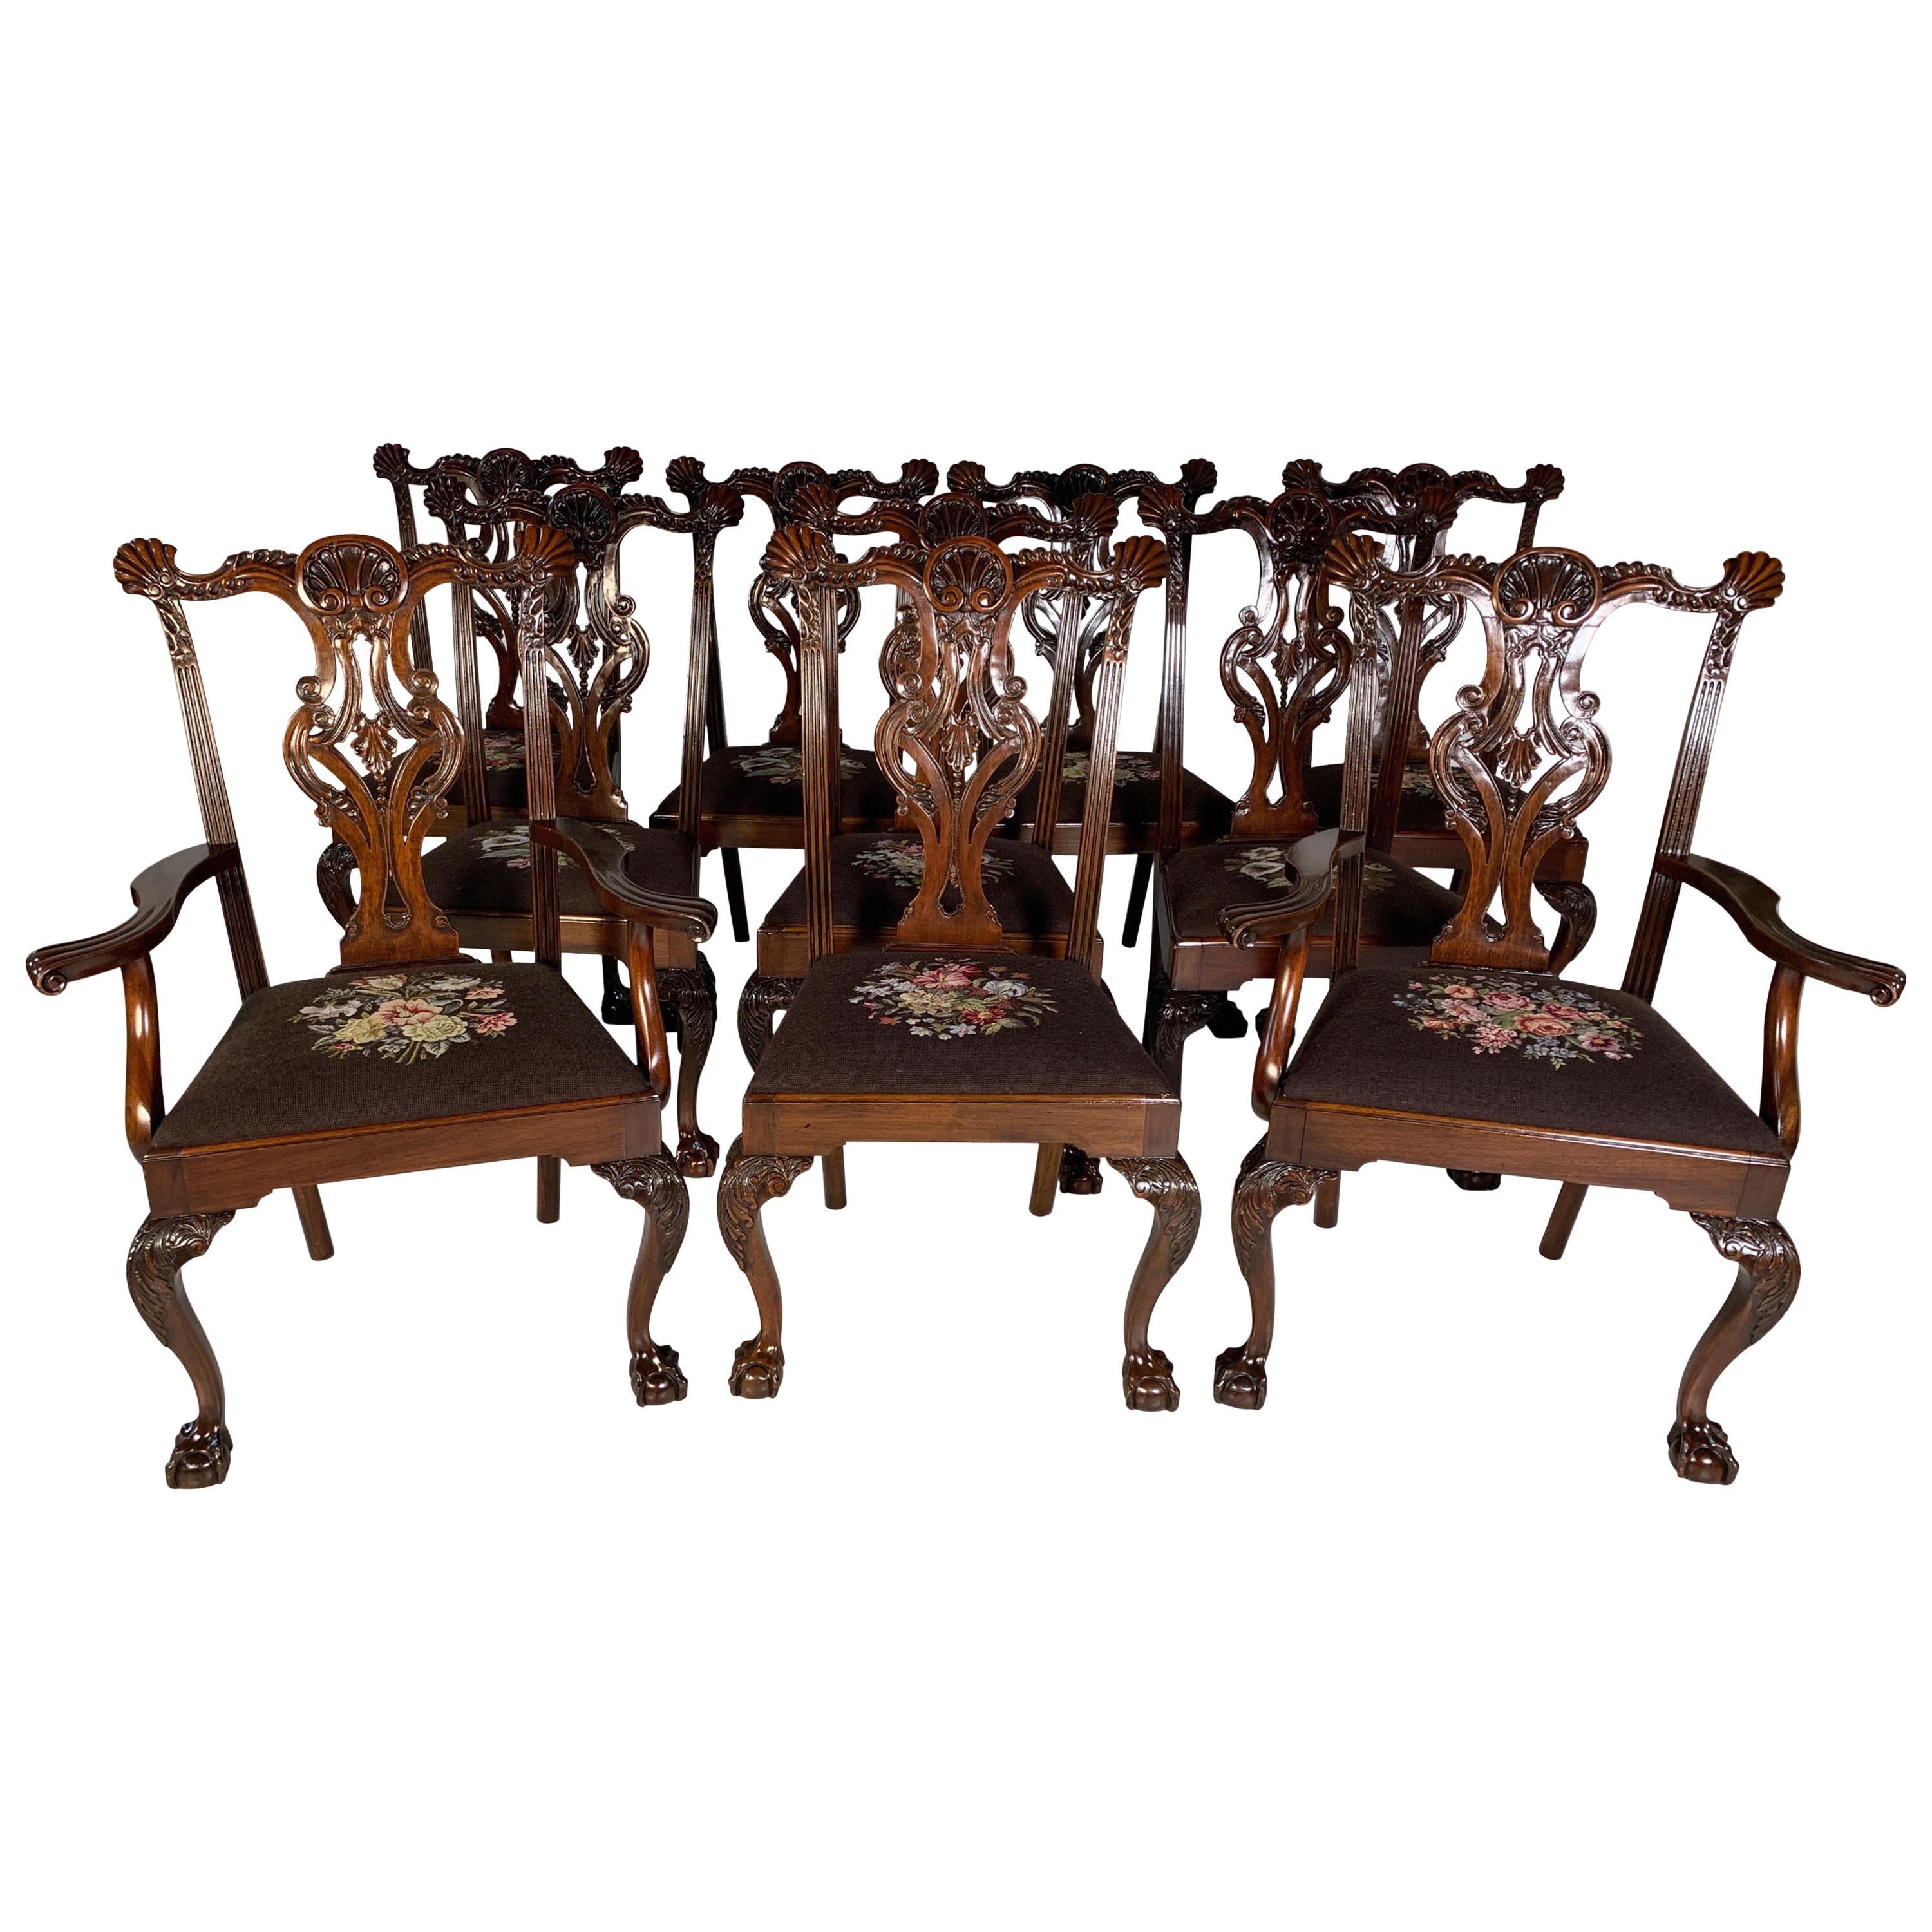 Set of Ten Beautifully Hand Carved Mahogany Chippendale Style Chairs, circa 1870 For Sale